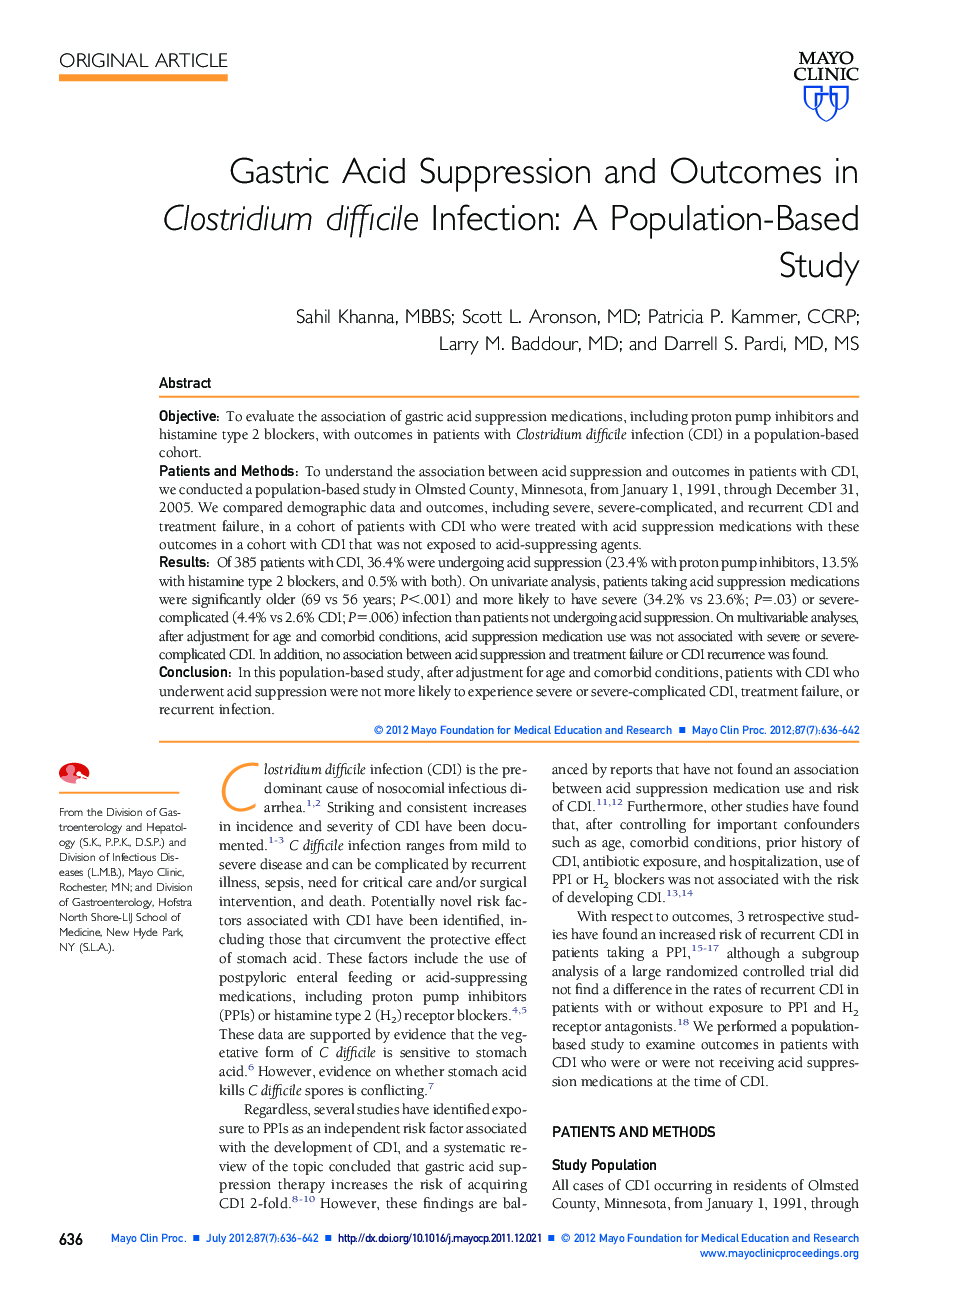 Gastric Acid Suppression and Outcomes in Clostridium difficile Infection: A Population-Based Study